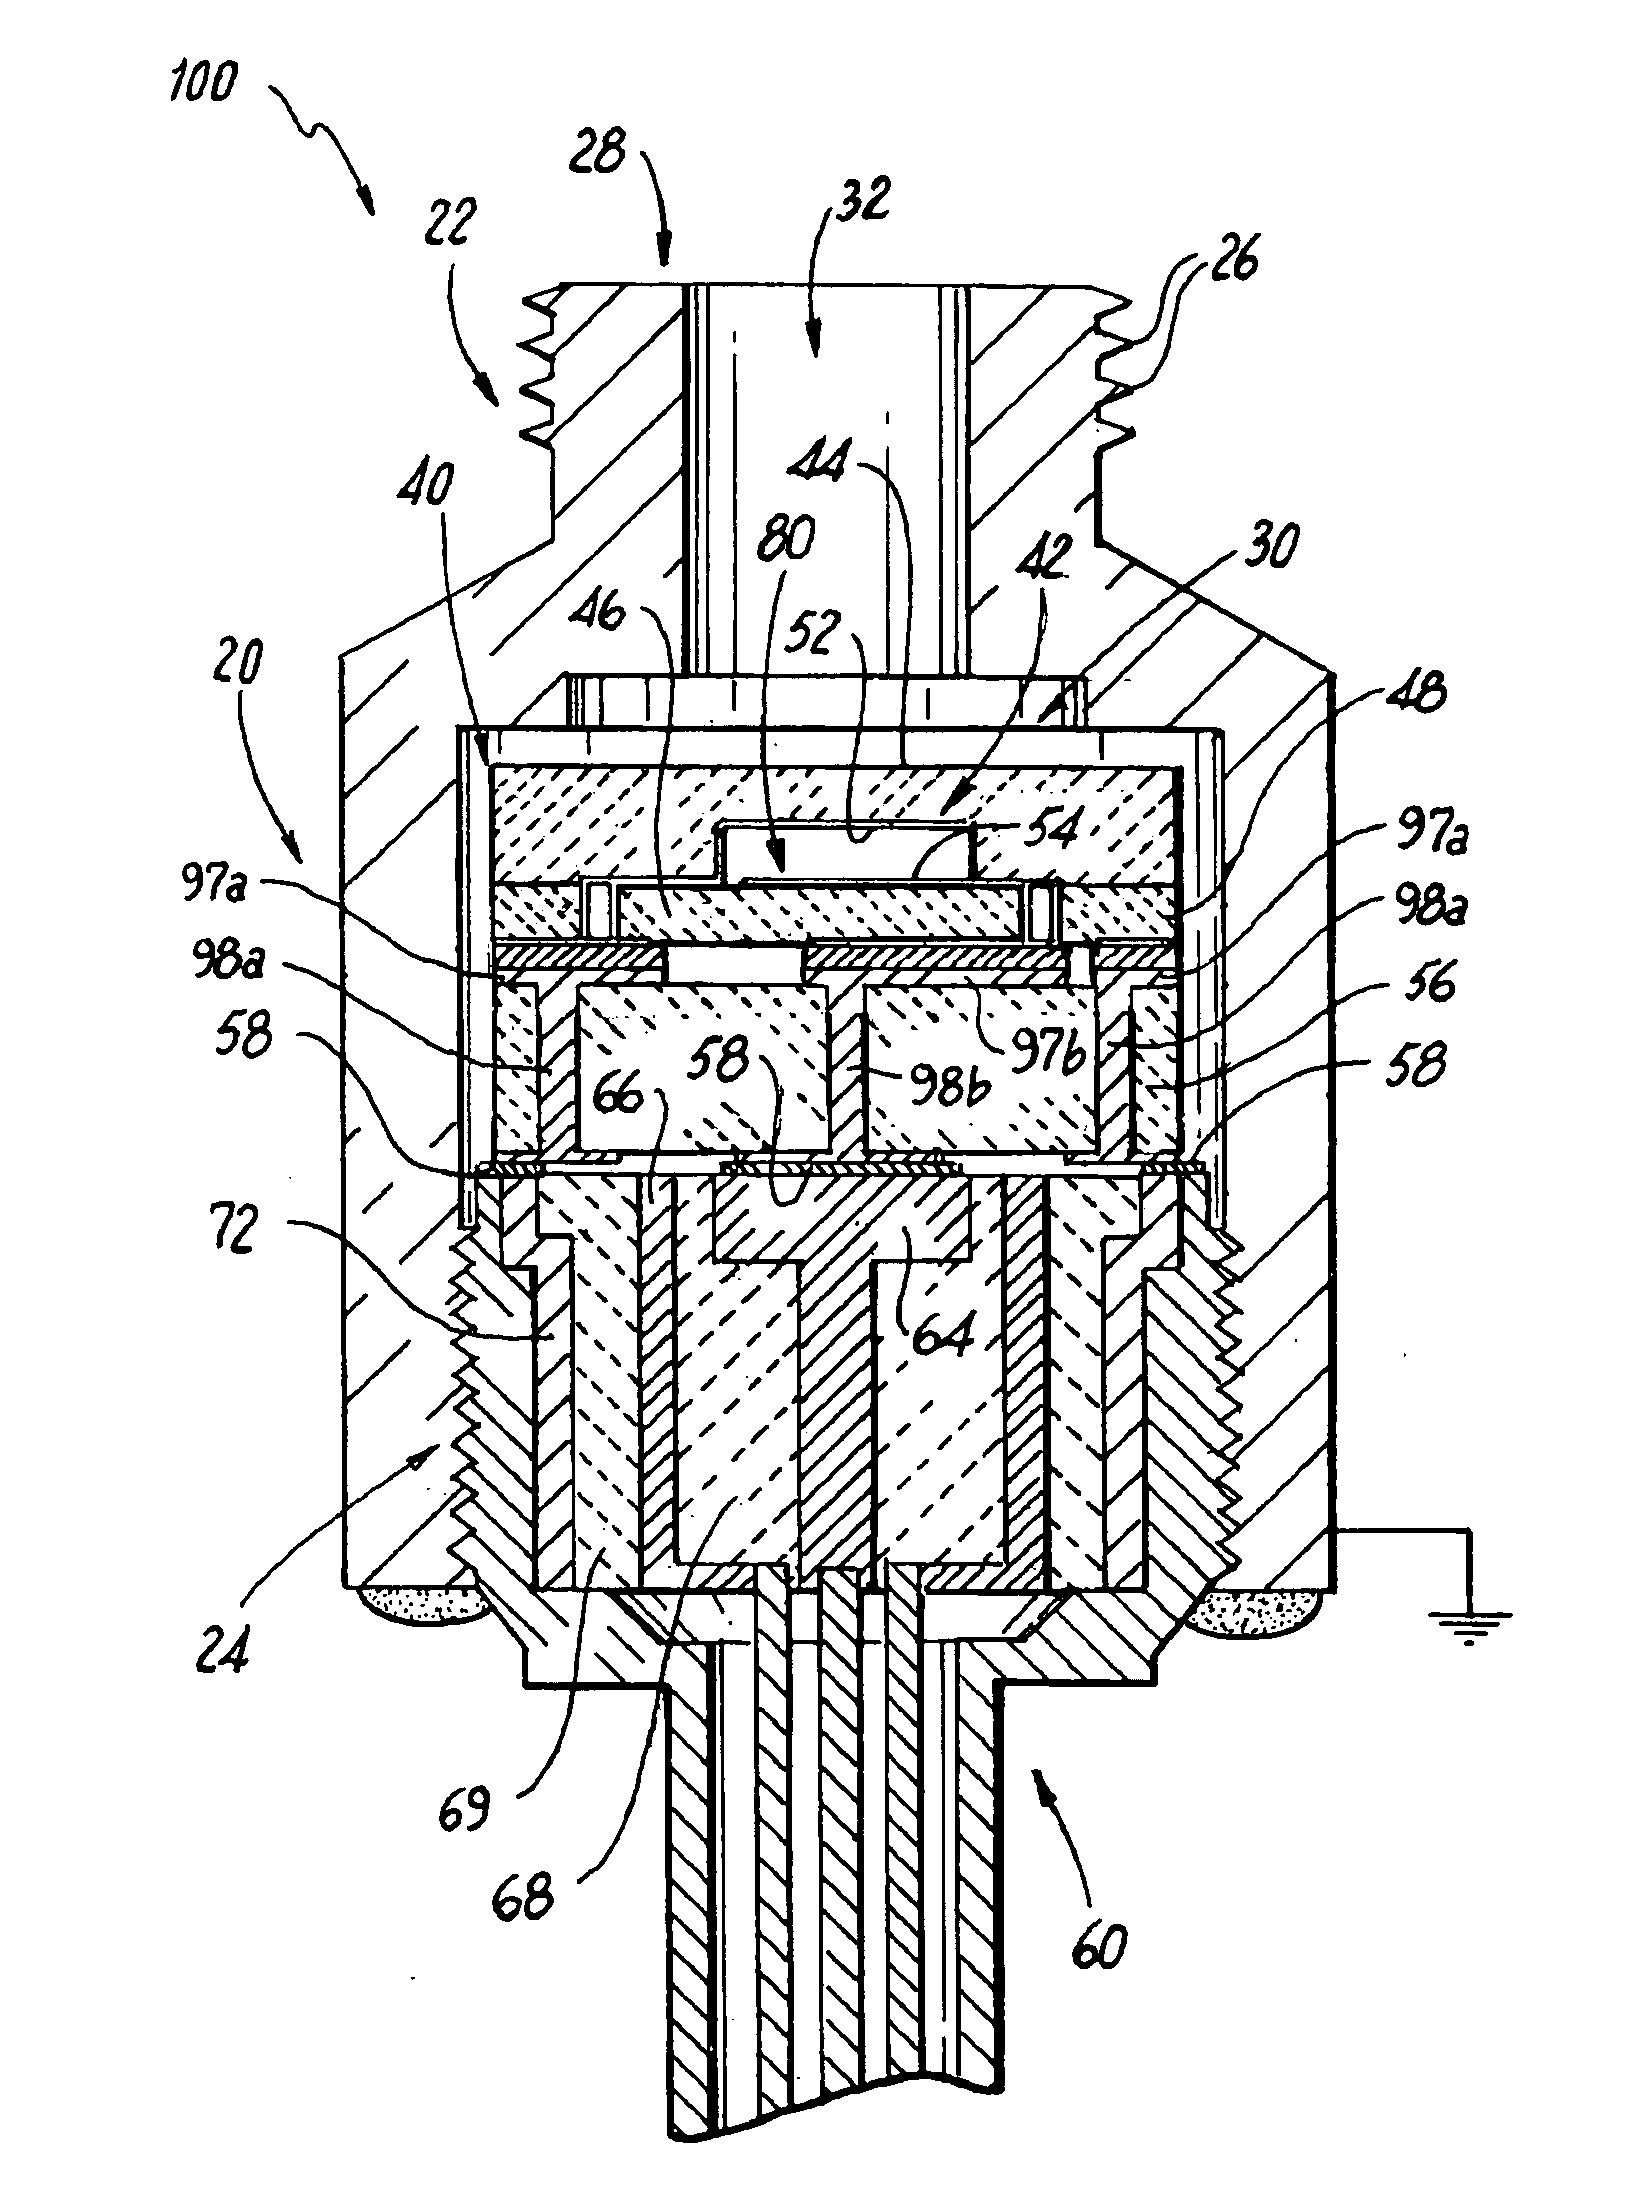 High temperature capacitive static/dynamic pressure sensors and methods of making the same